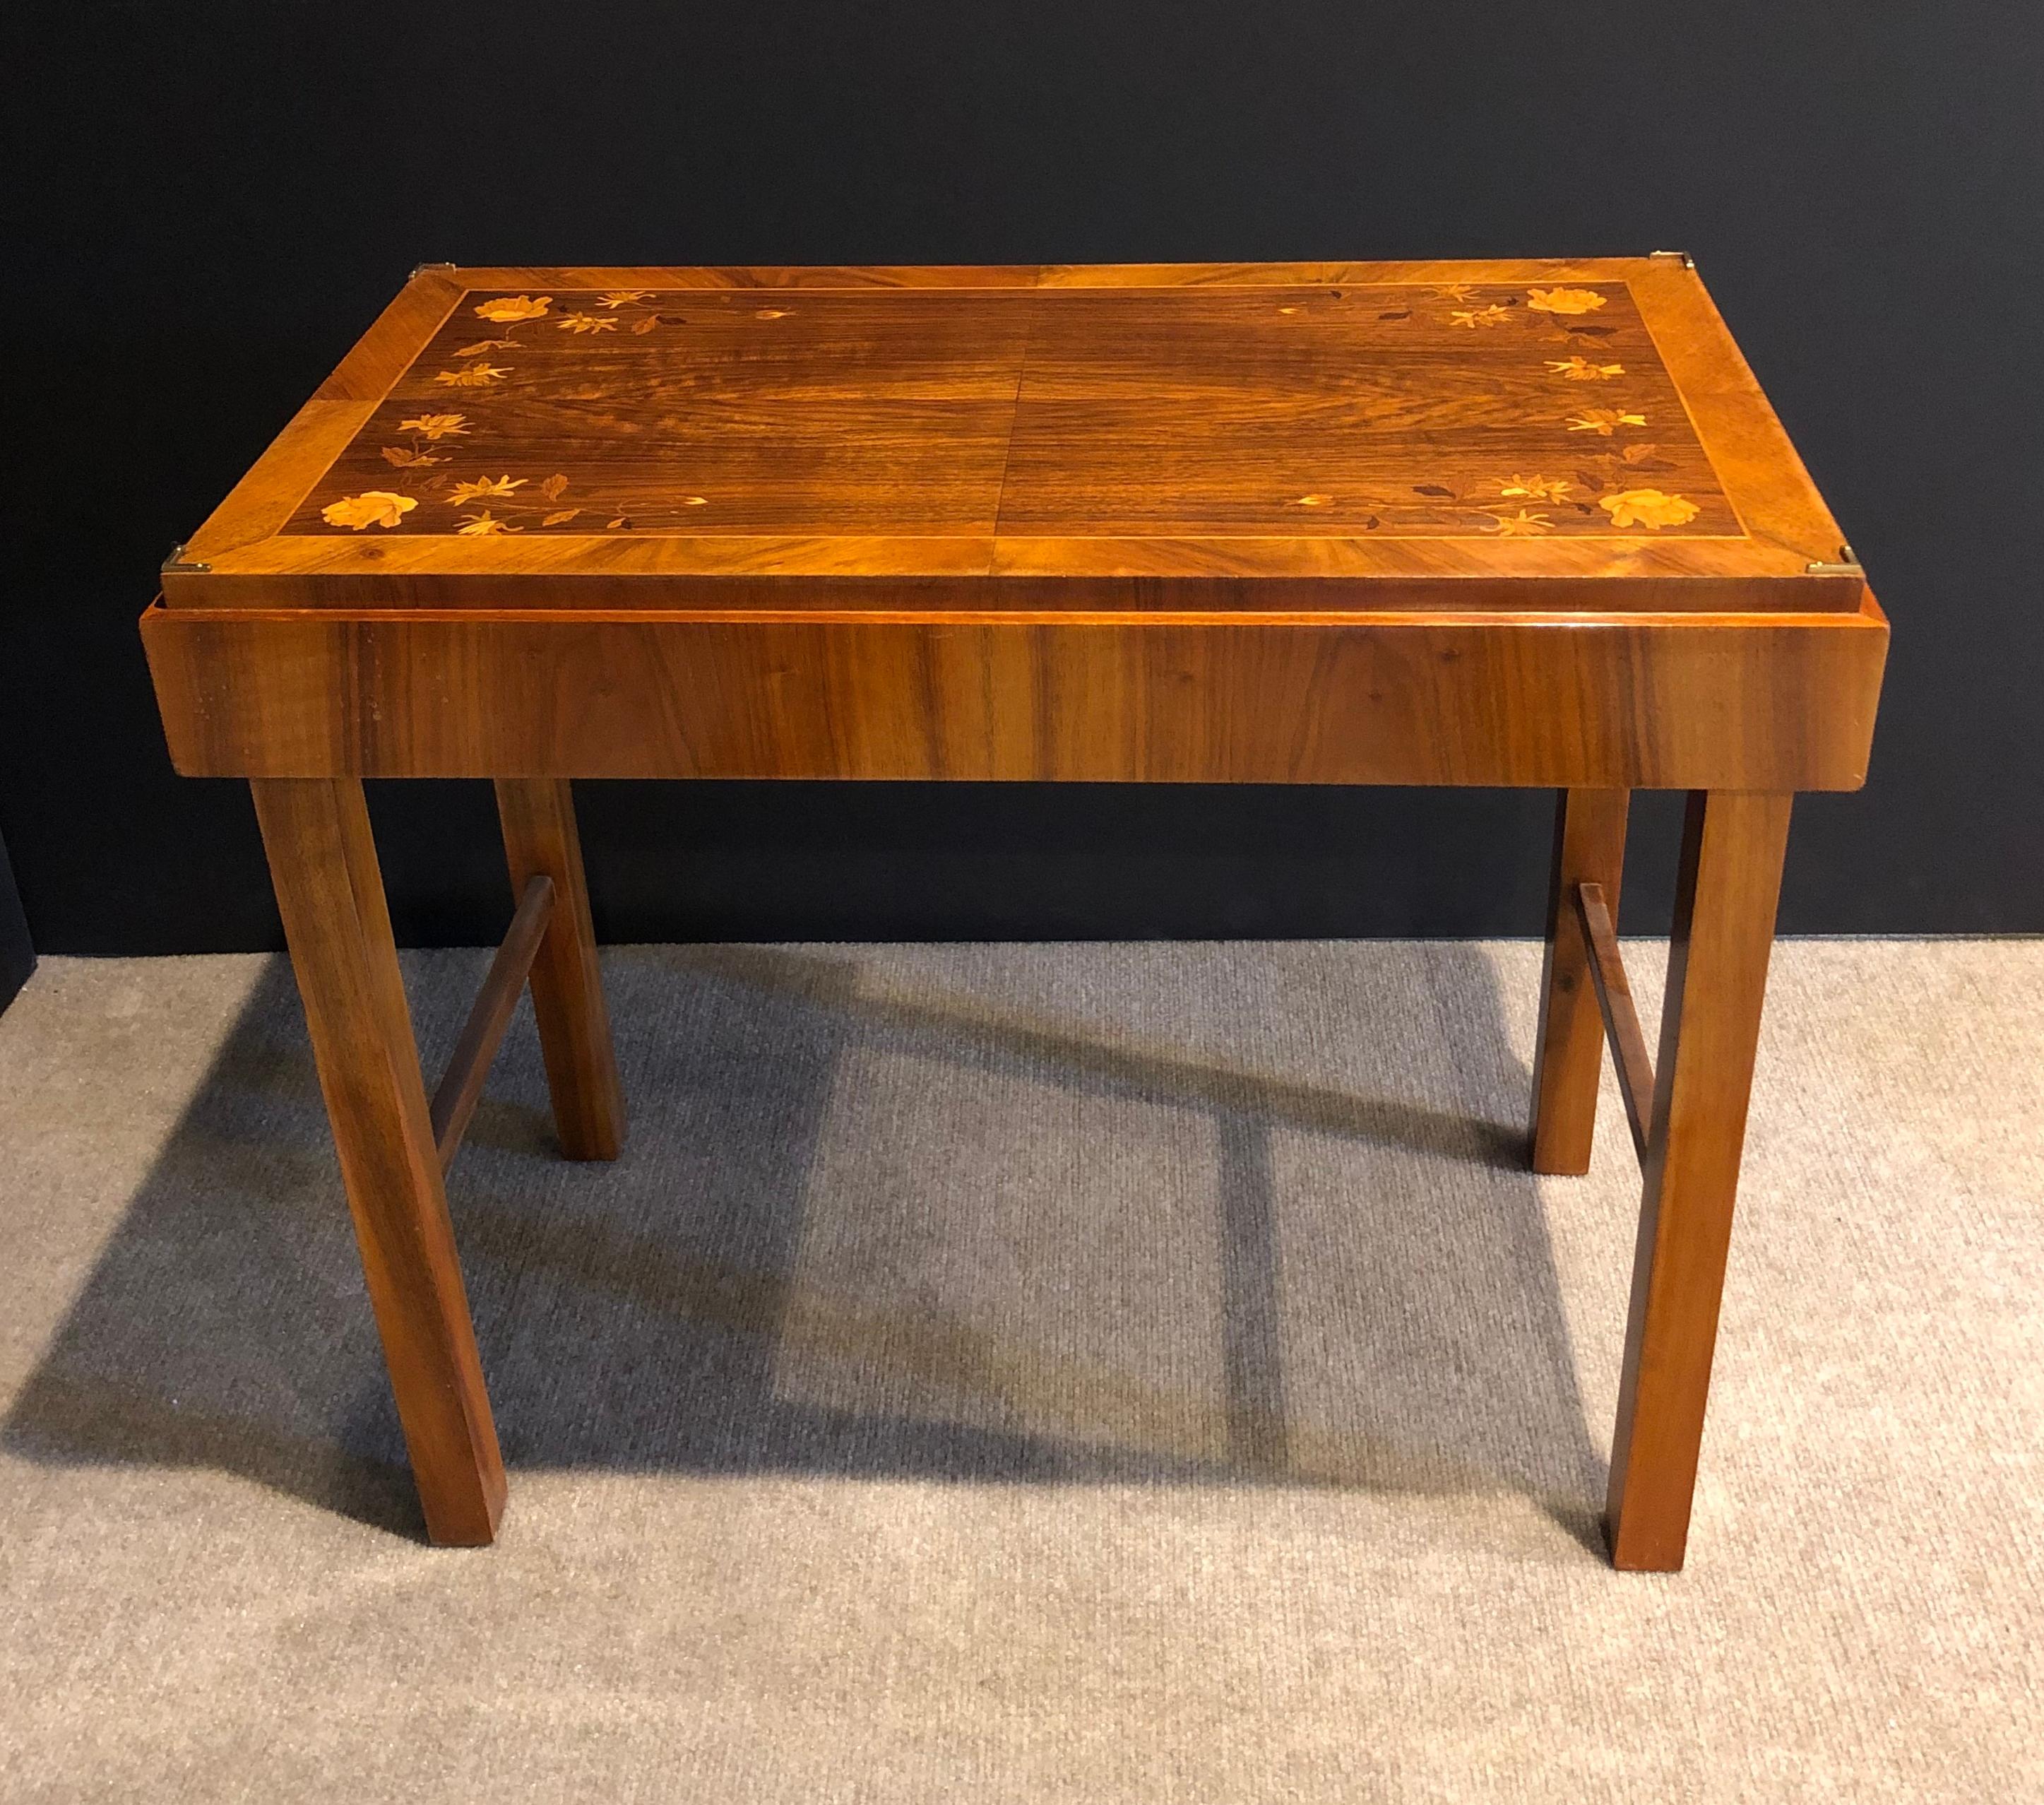 Art Deco walnut and parquetry folding side table. Franz Seifert design for Kunst-Mobel, Germany. Art Deco modern folding snake table with beautiful floral marquetry inlay on top. Makers label on bottom.